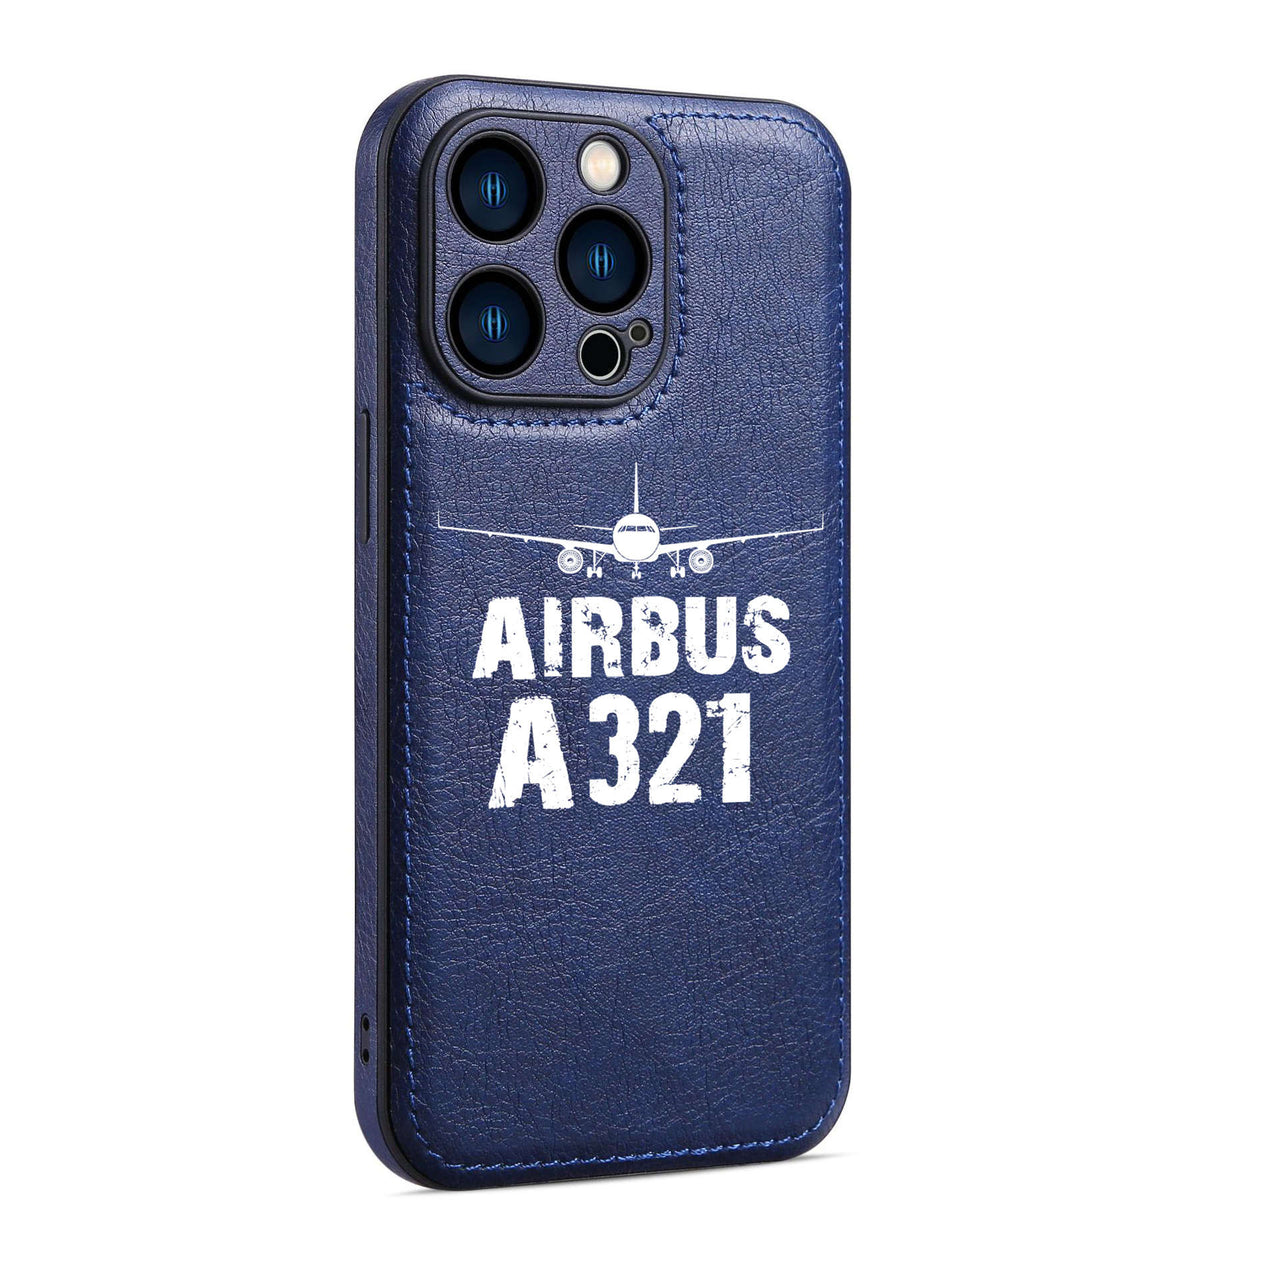 Airbus A321 & Plane Designed Leather iPhone Cases